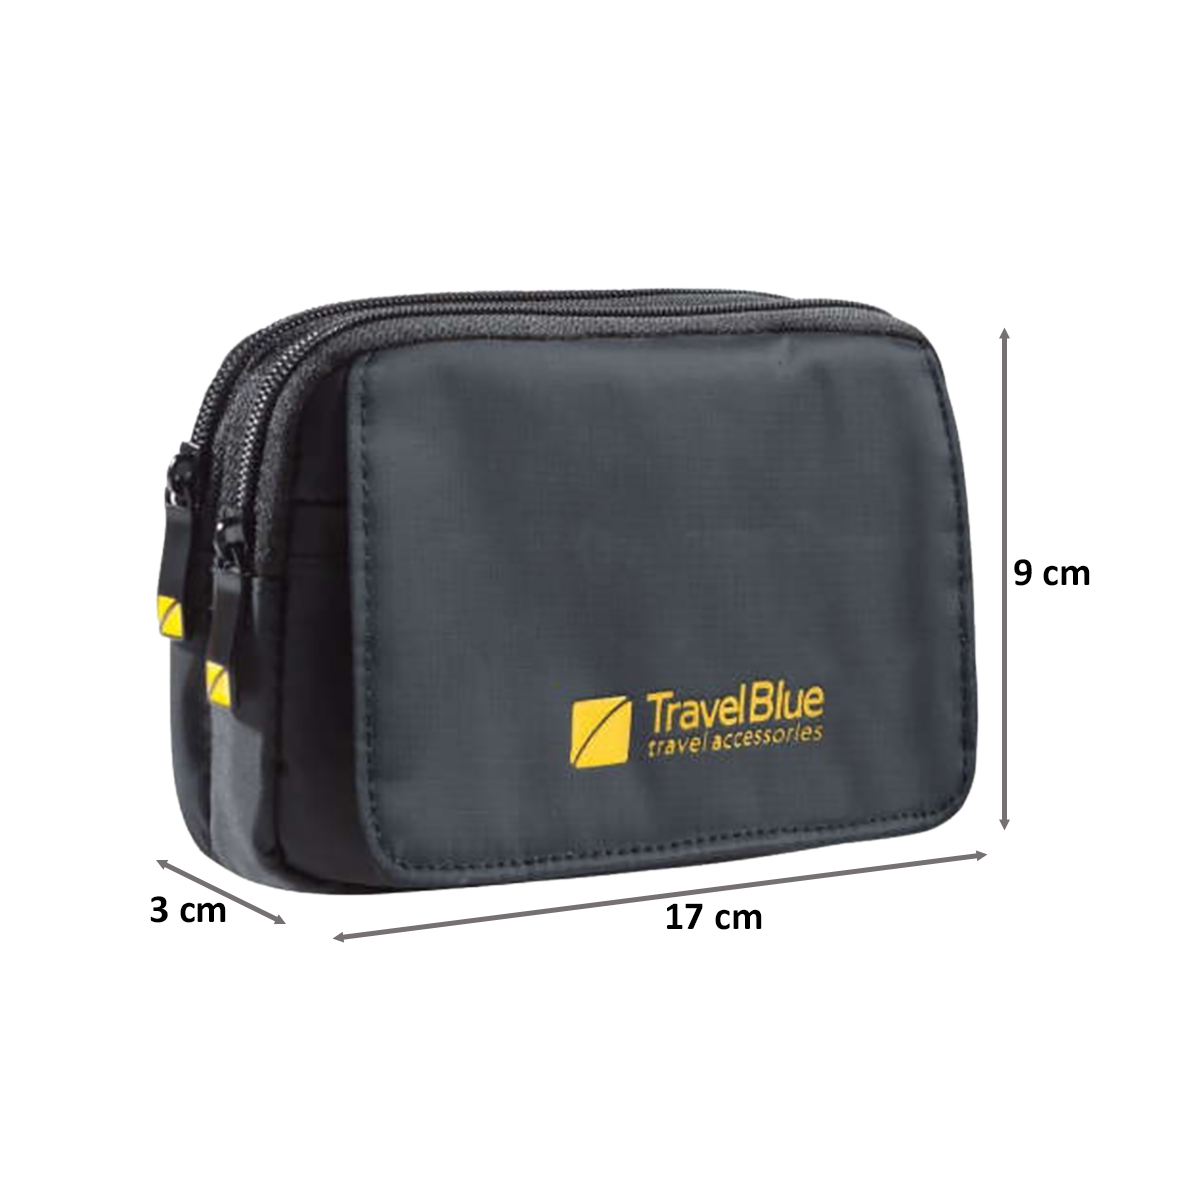 Croma CRSTTO1TBA264401 Small Travel Bag - Small - Price in India, Reviews,  Ratings & Specifications | Flipkart.com